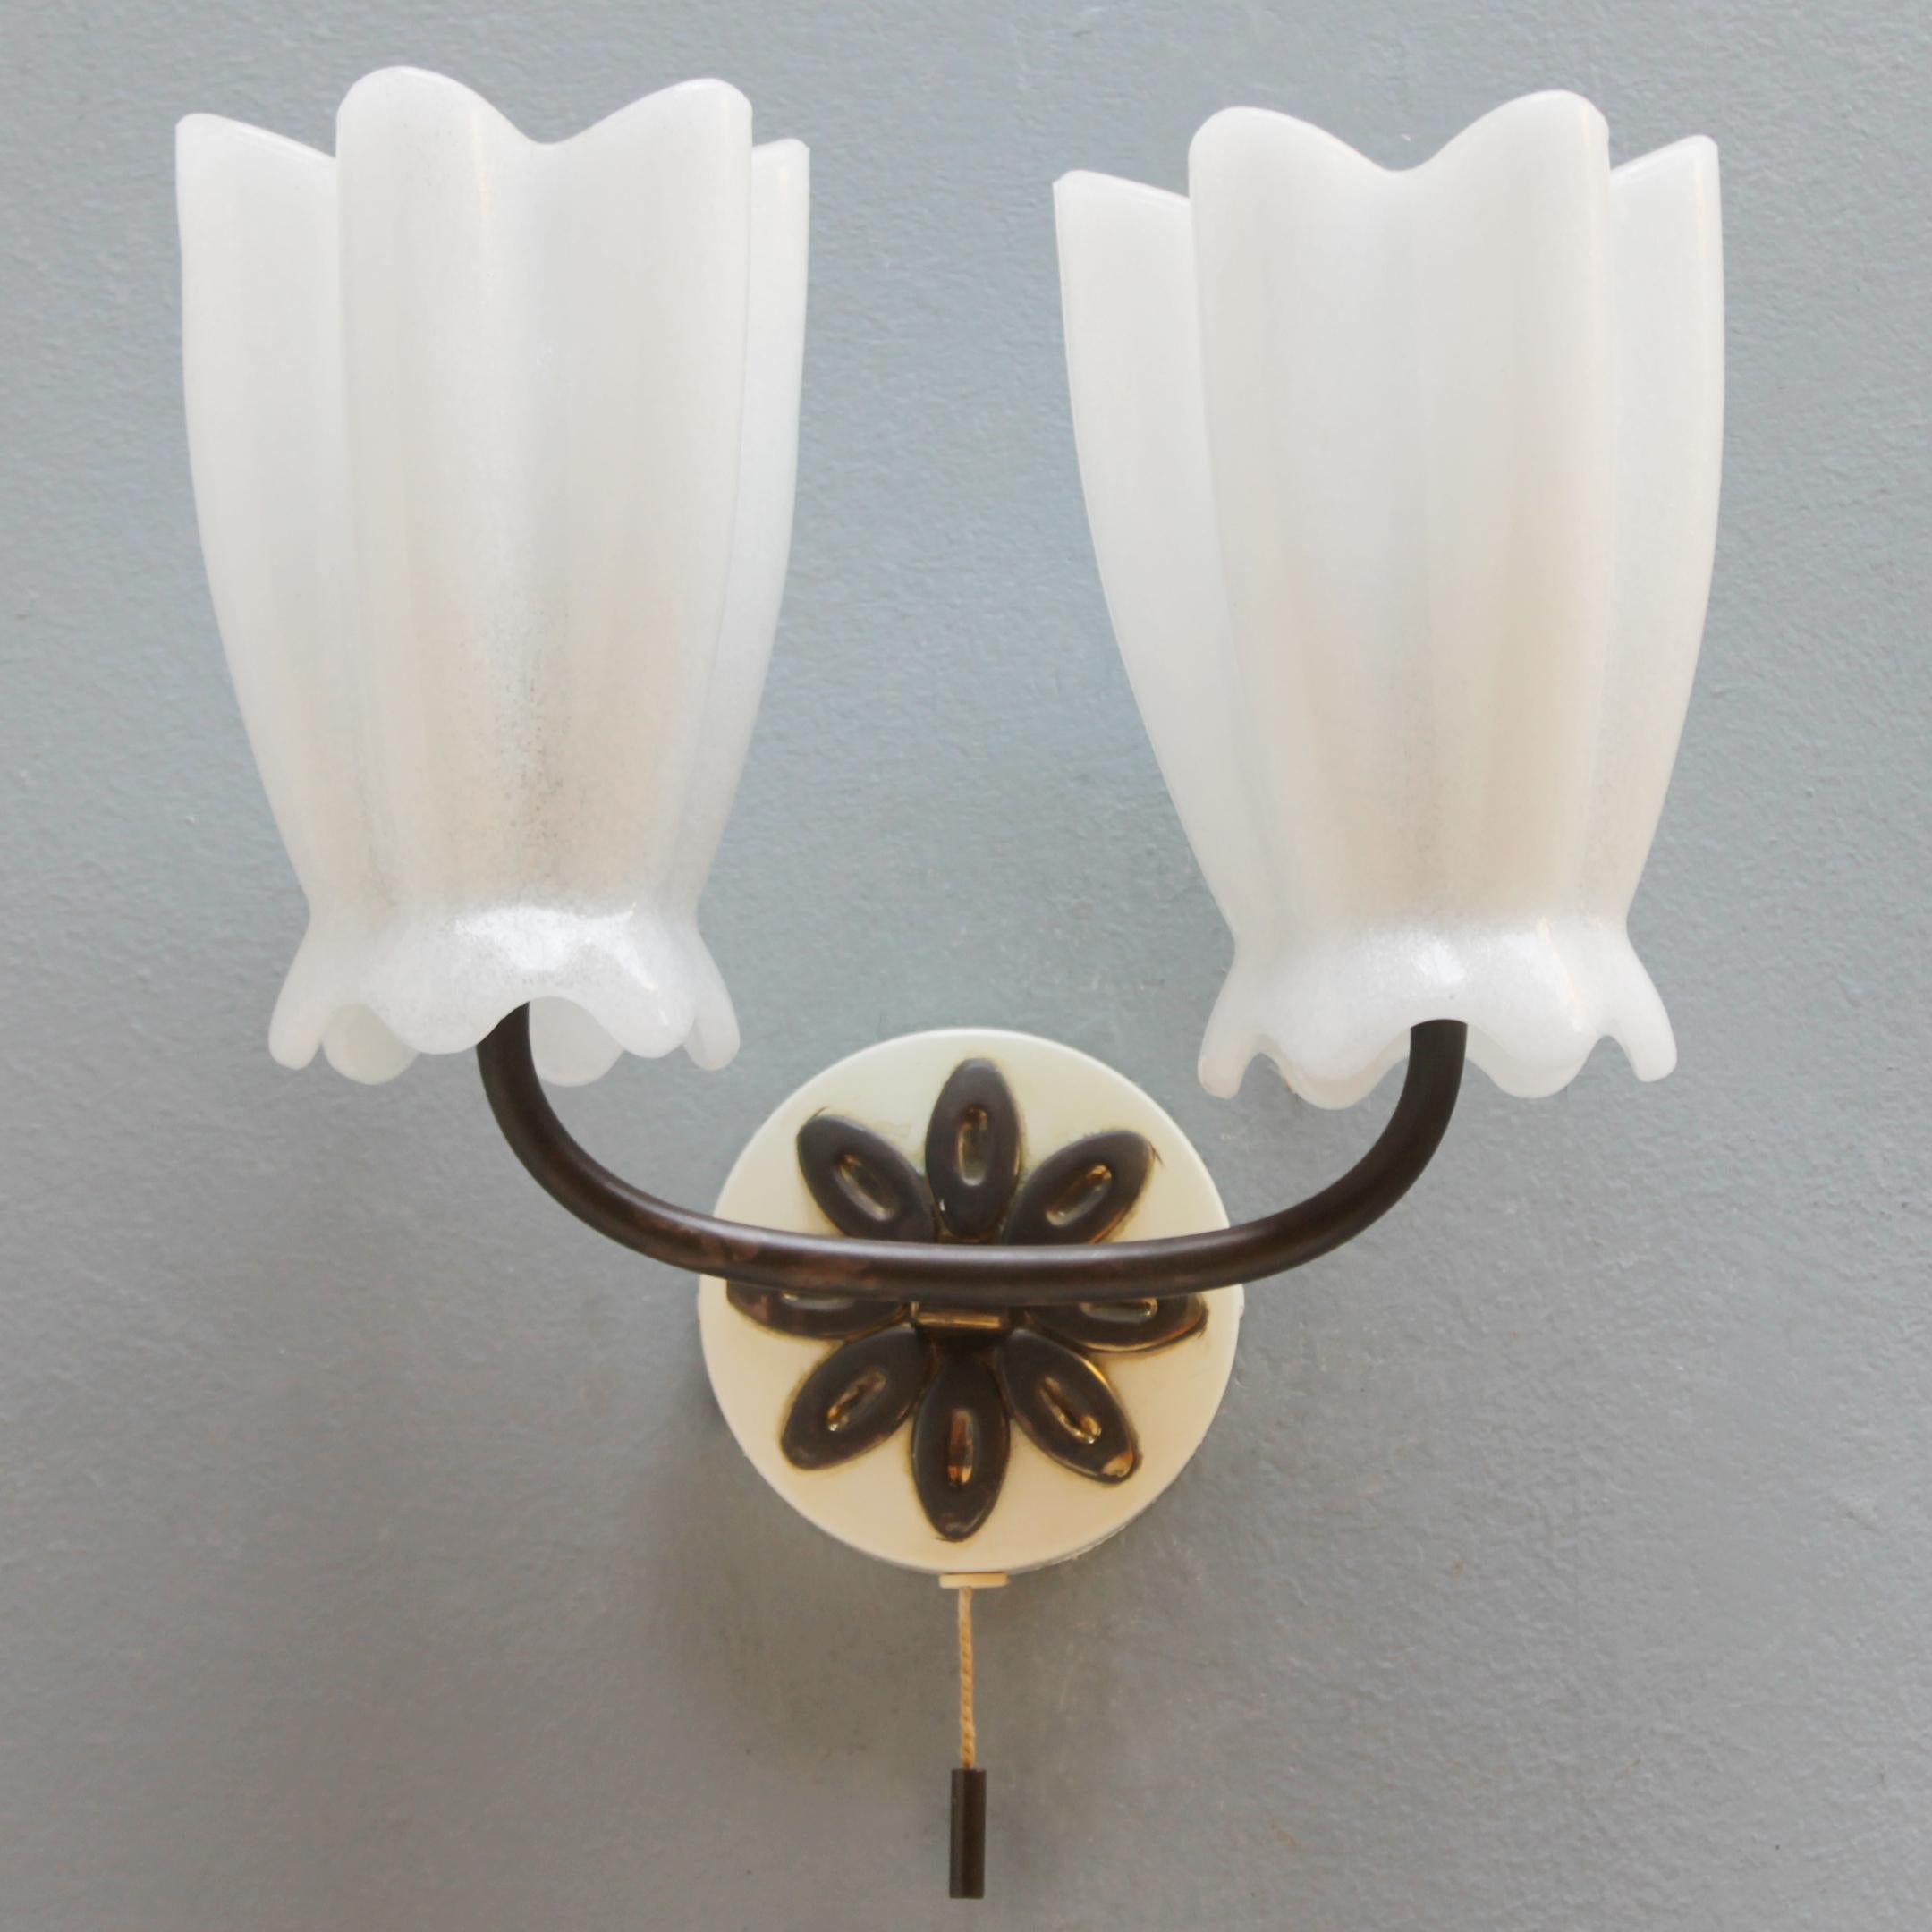 Elegant wall lamp from the company Hillebrand, Germany. Metal, brass and white pate-de-verre (molten glass). This model with a pull function is from the 1950s and is not often seen. Marked with a label. 
Little remains of the gilding, but still a